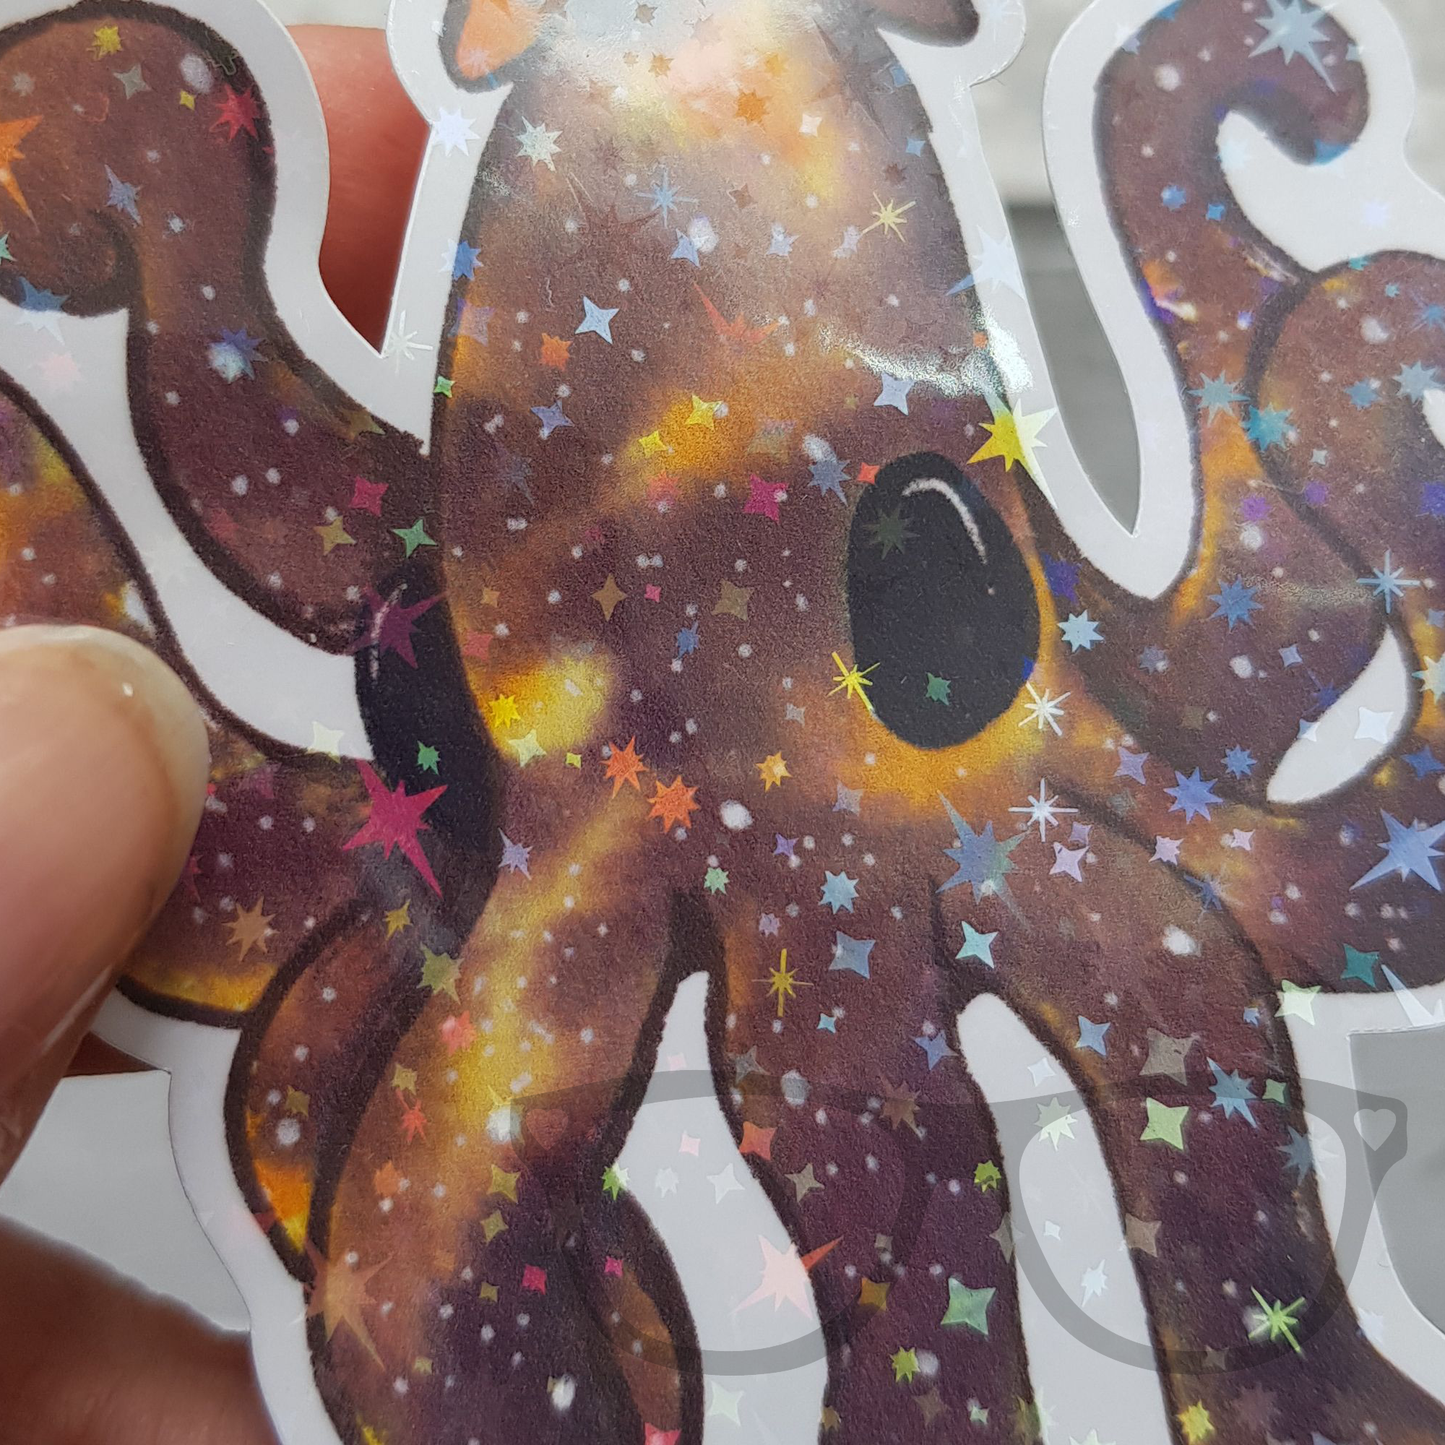 Close up of the octopus vinyl sticker showing off the star sparkles